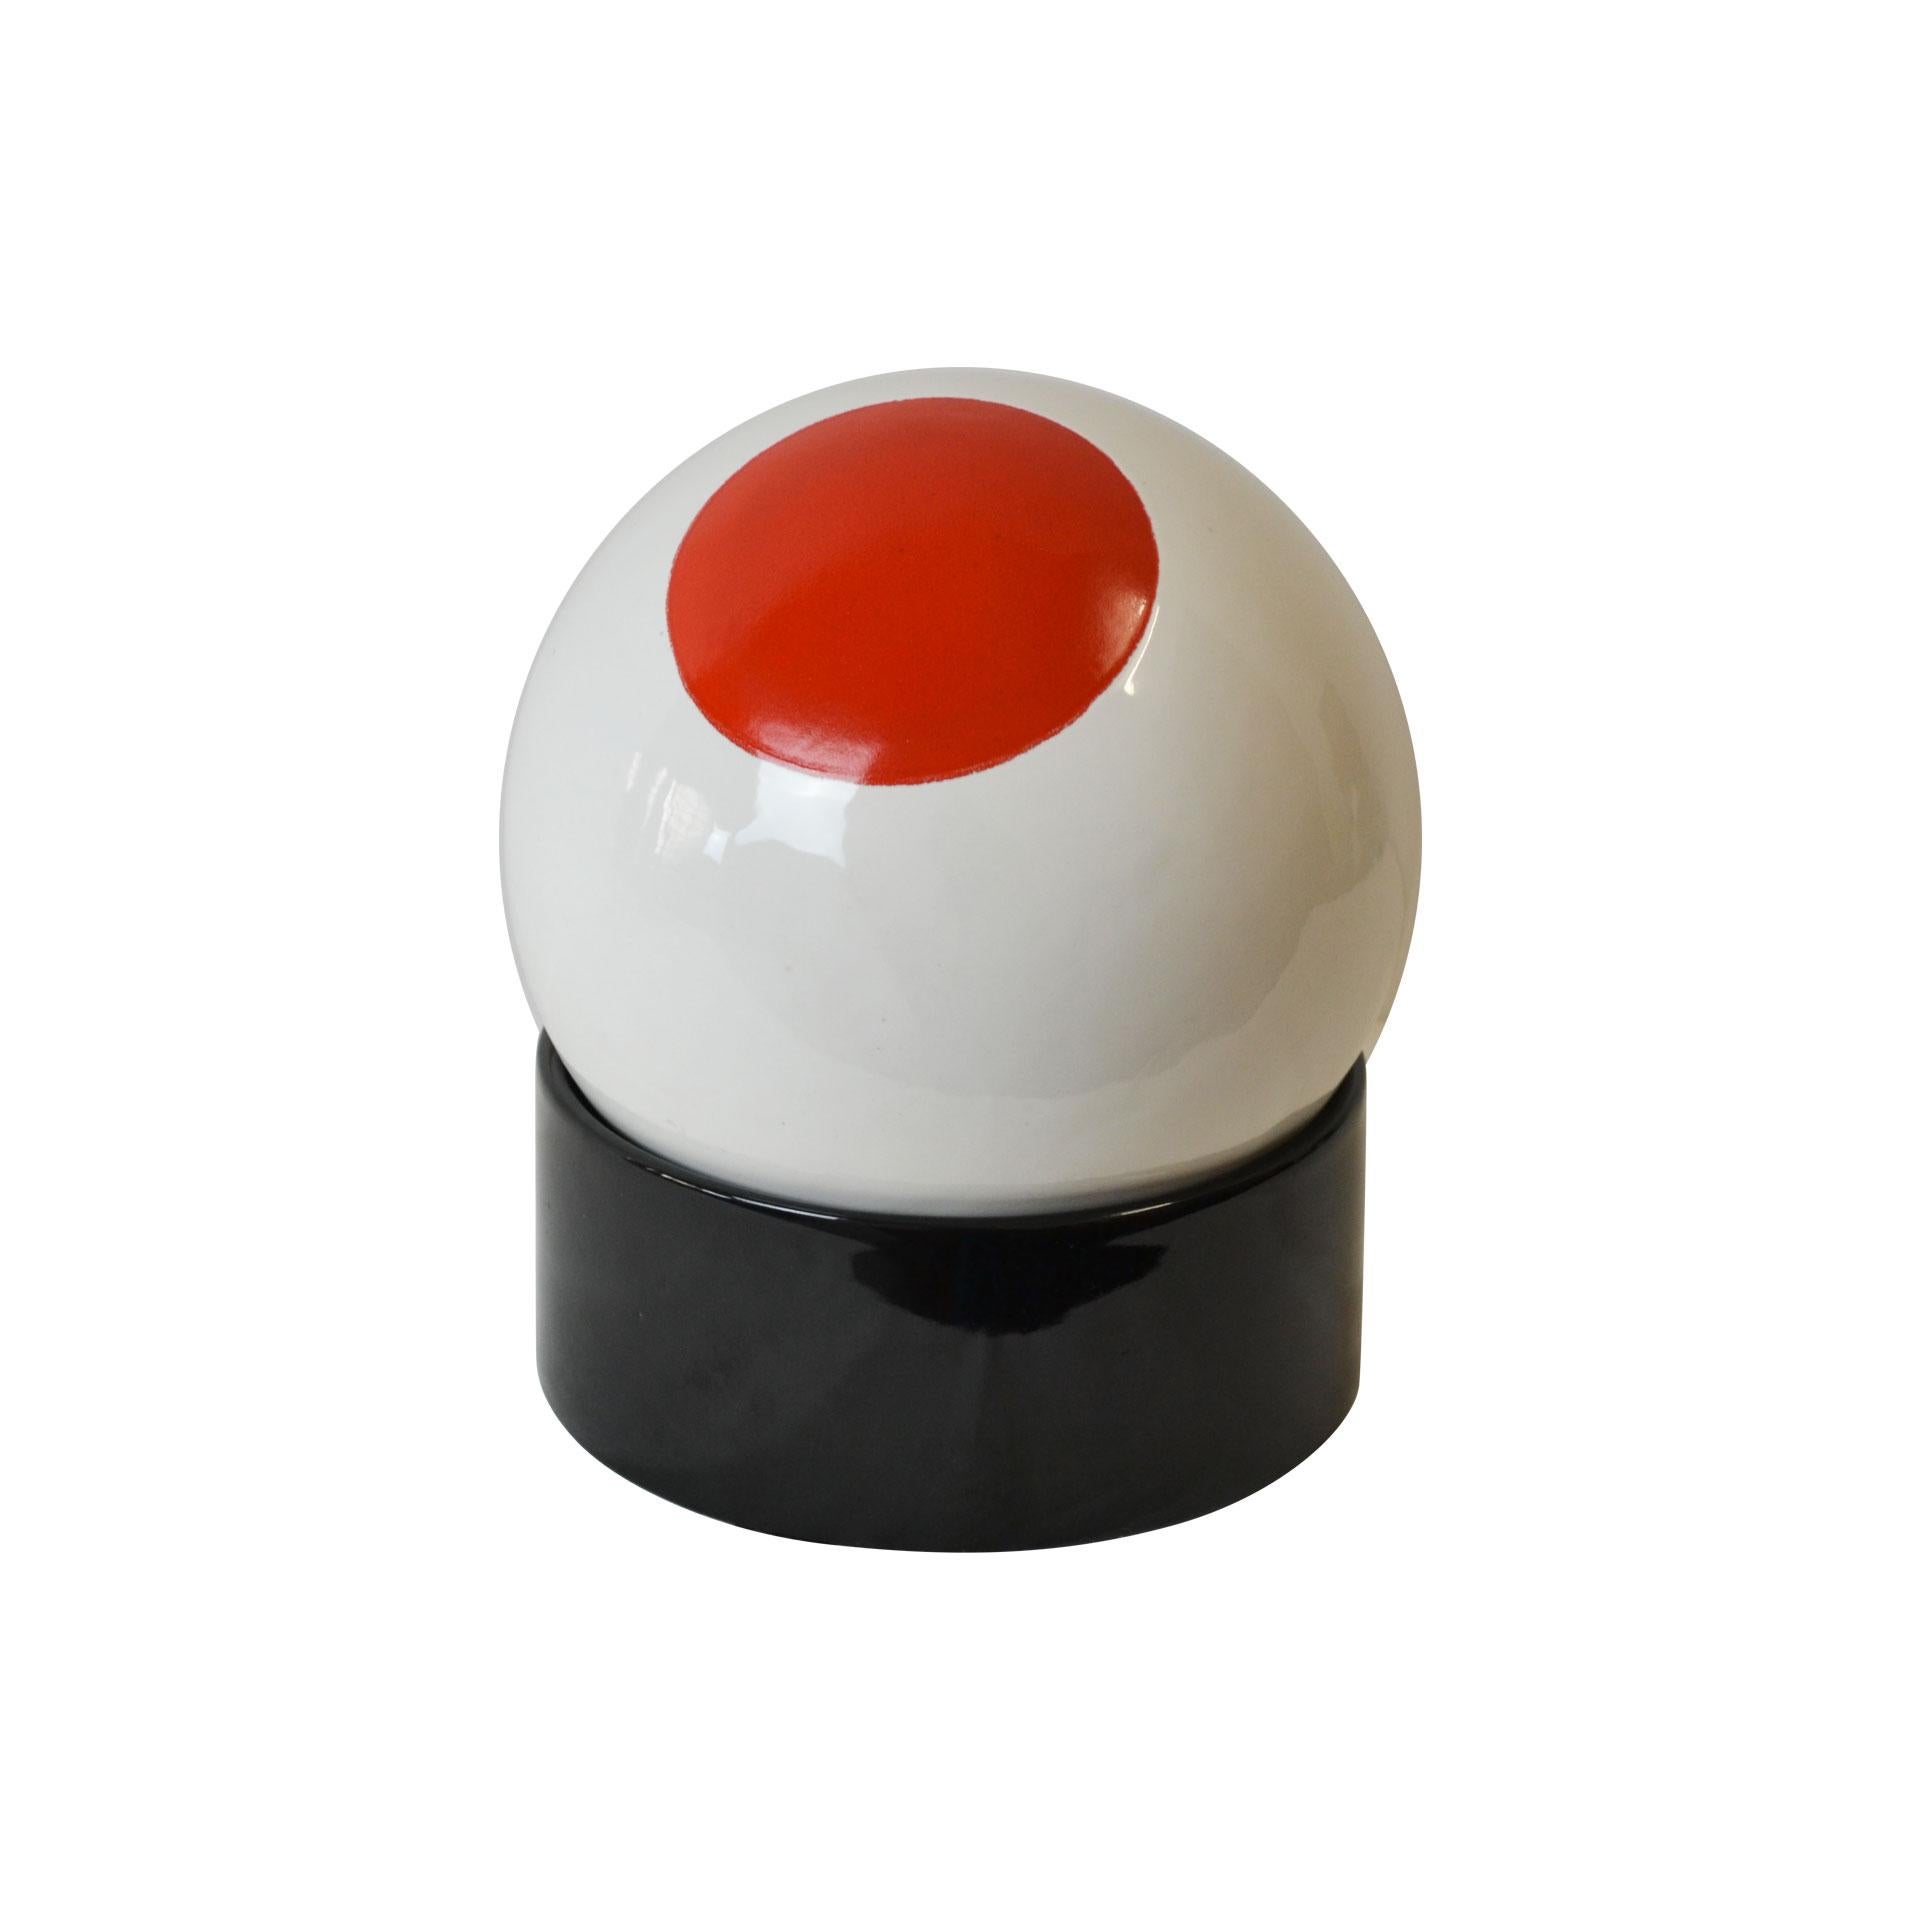 Eye shaped ceramic black, white and red colored, designed by Ico Parisi & Luisa Parisi in 1966 for Zanolly & Sebellin. The ceramic still carries the brand of the manufacturer. Entirely in glazed ceramic. Very good condition.